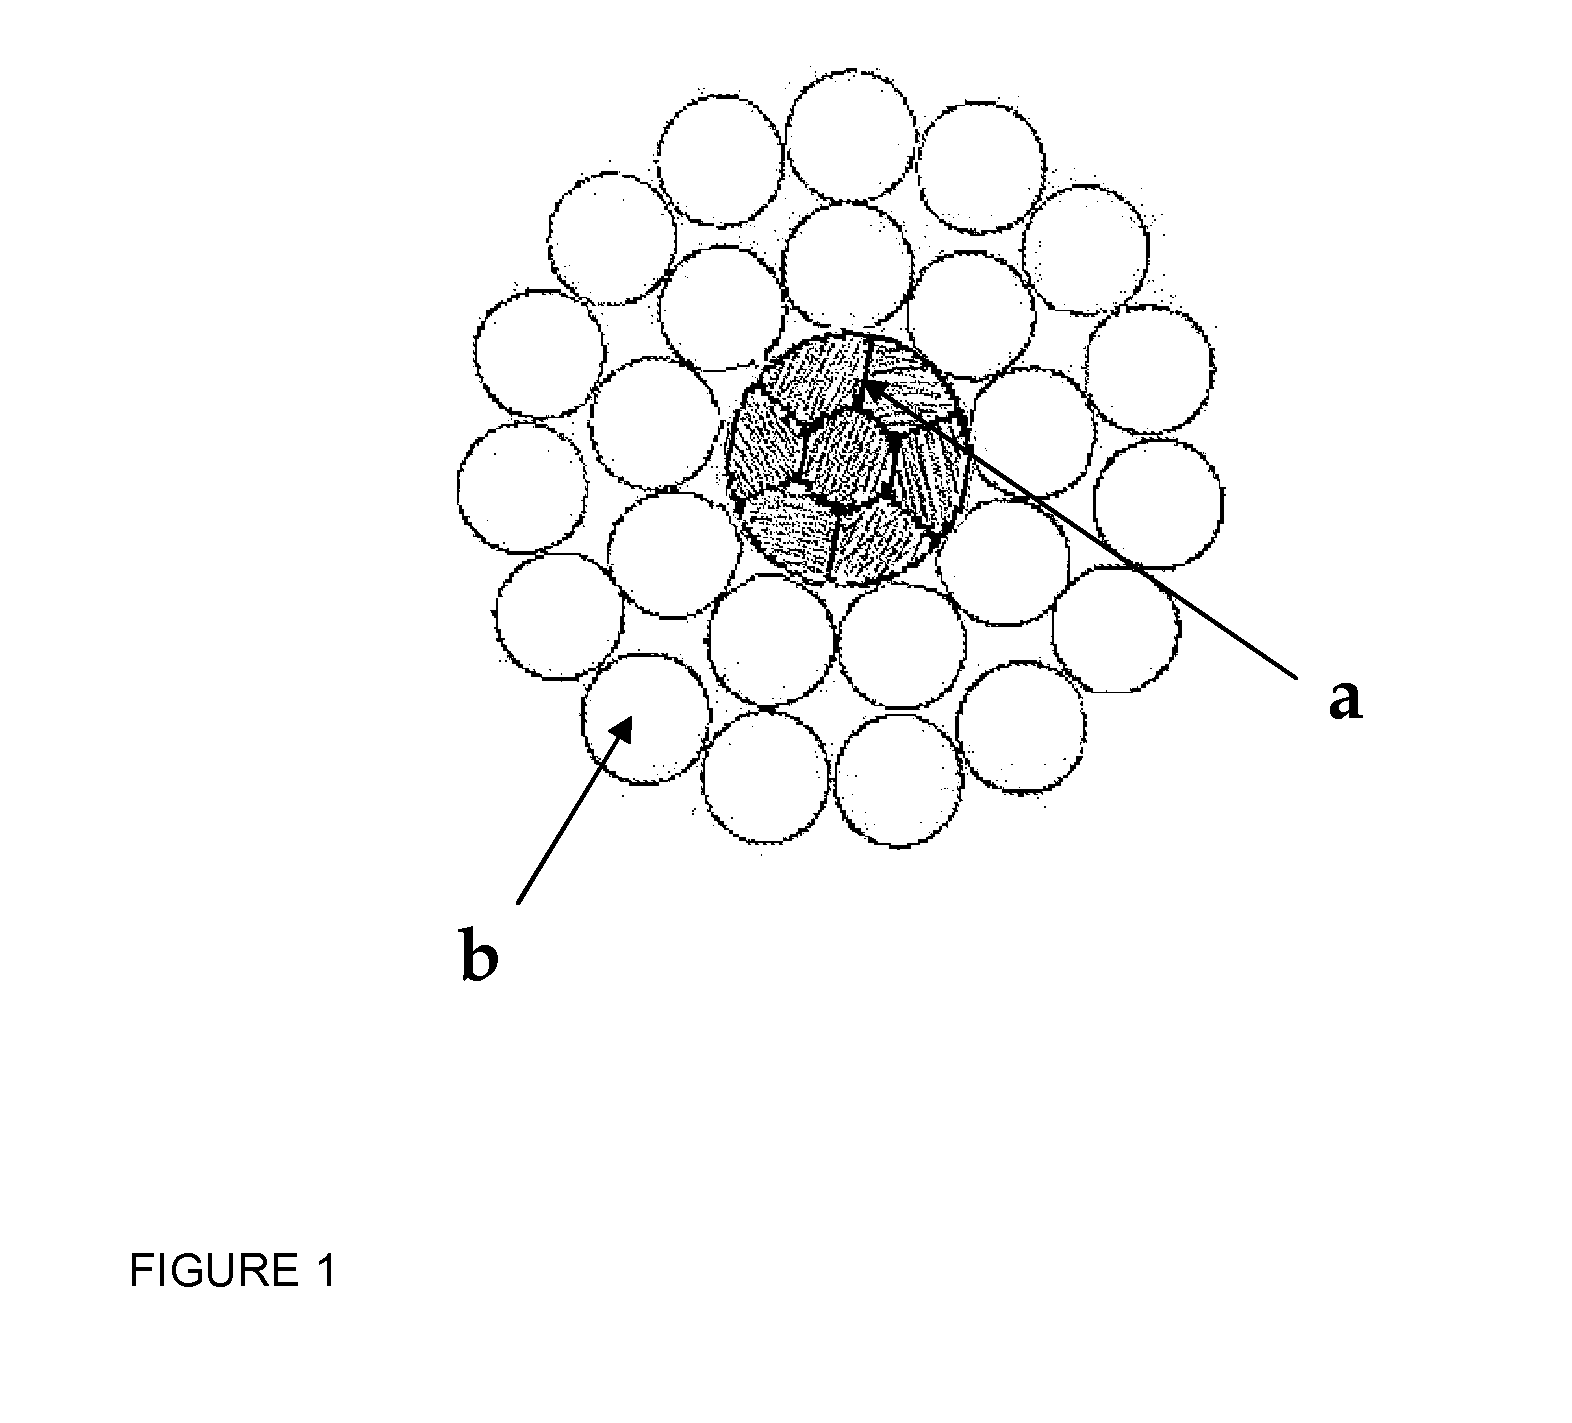 Steel core for an electric transmission cable and method of fabricating it